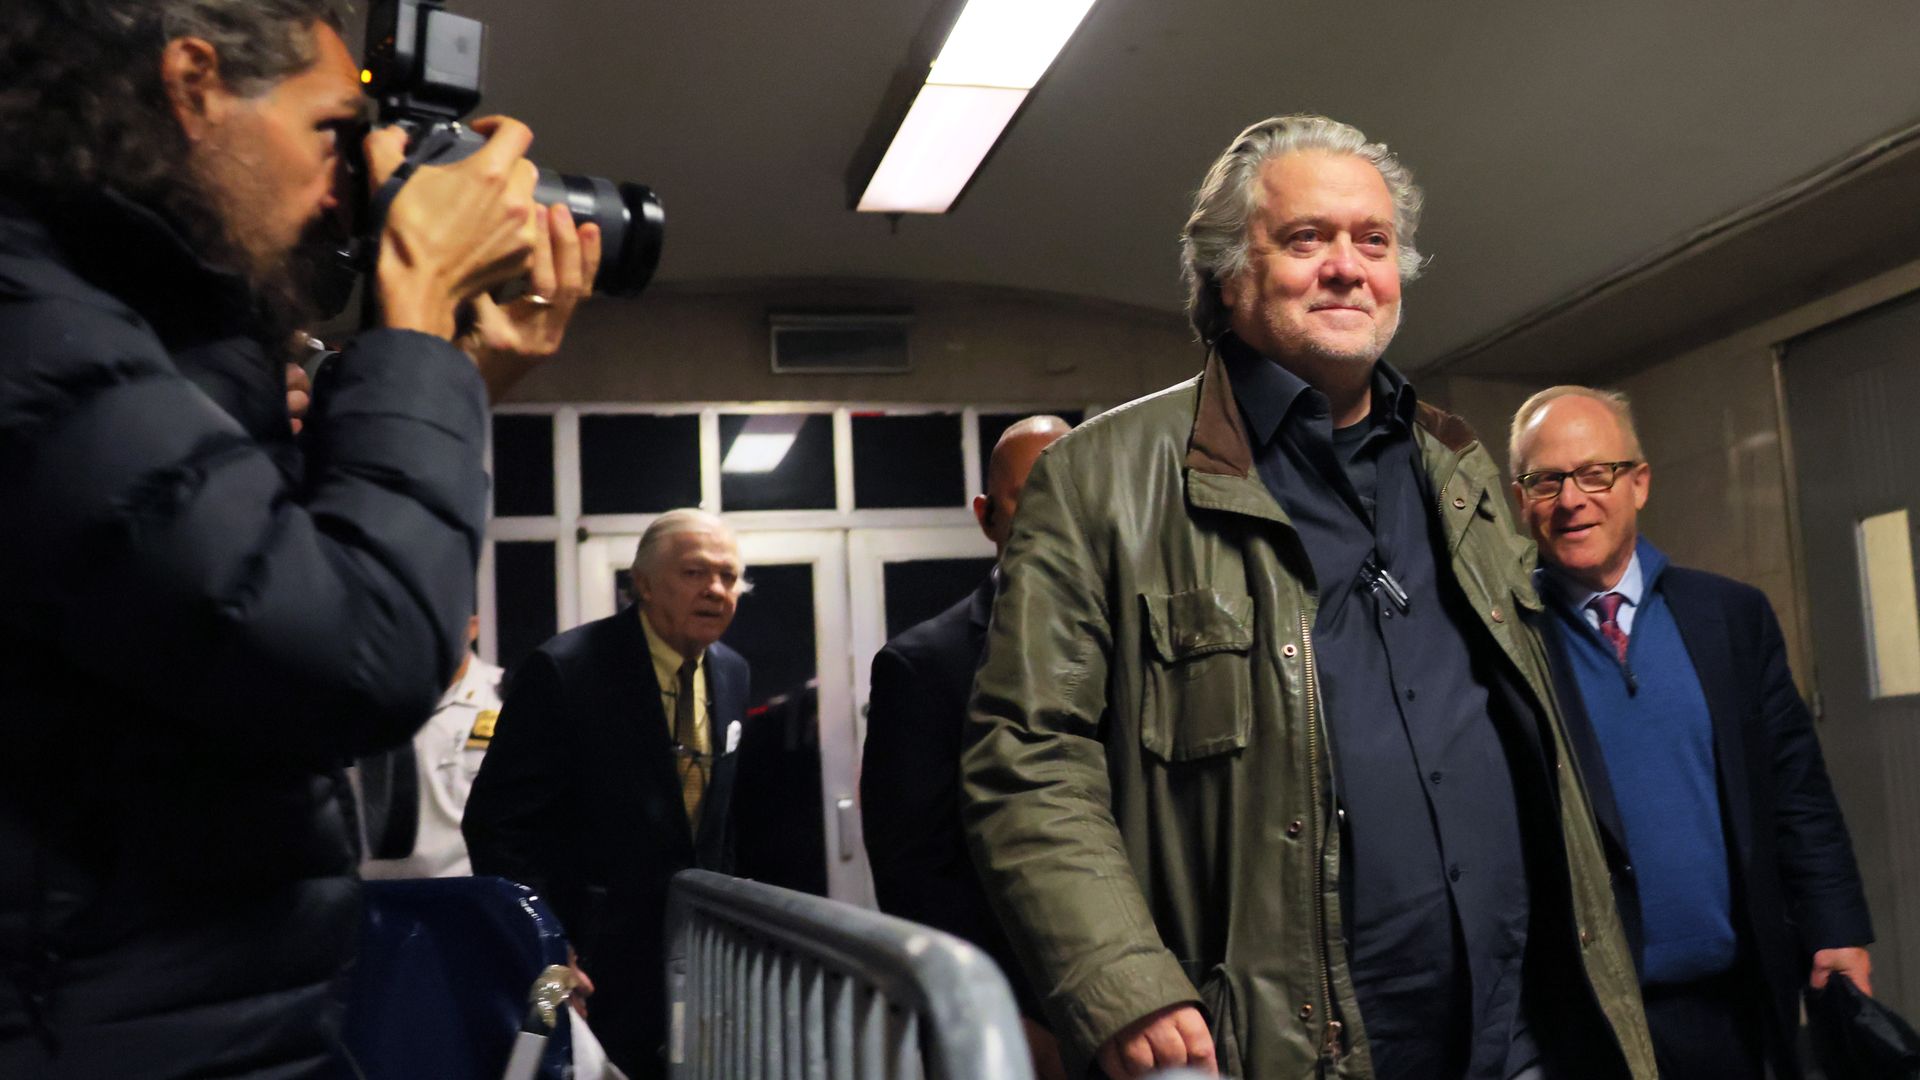 Steve Bannon walking and smiling